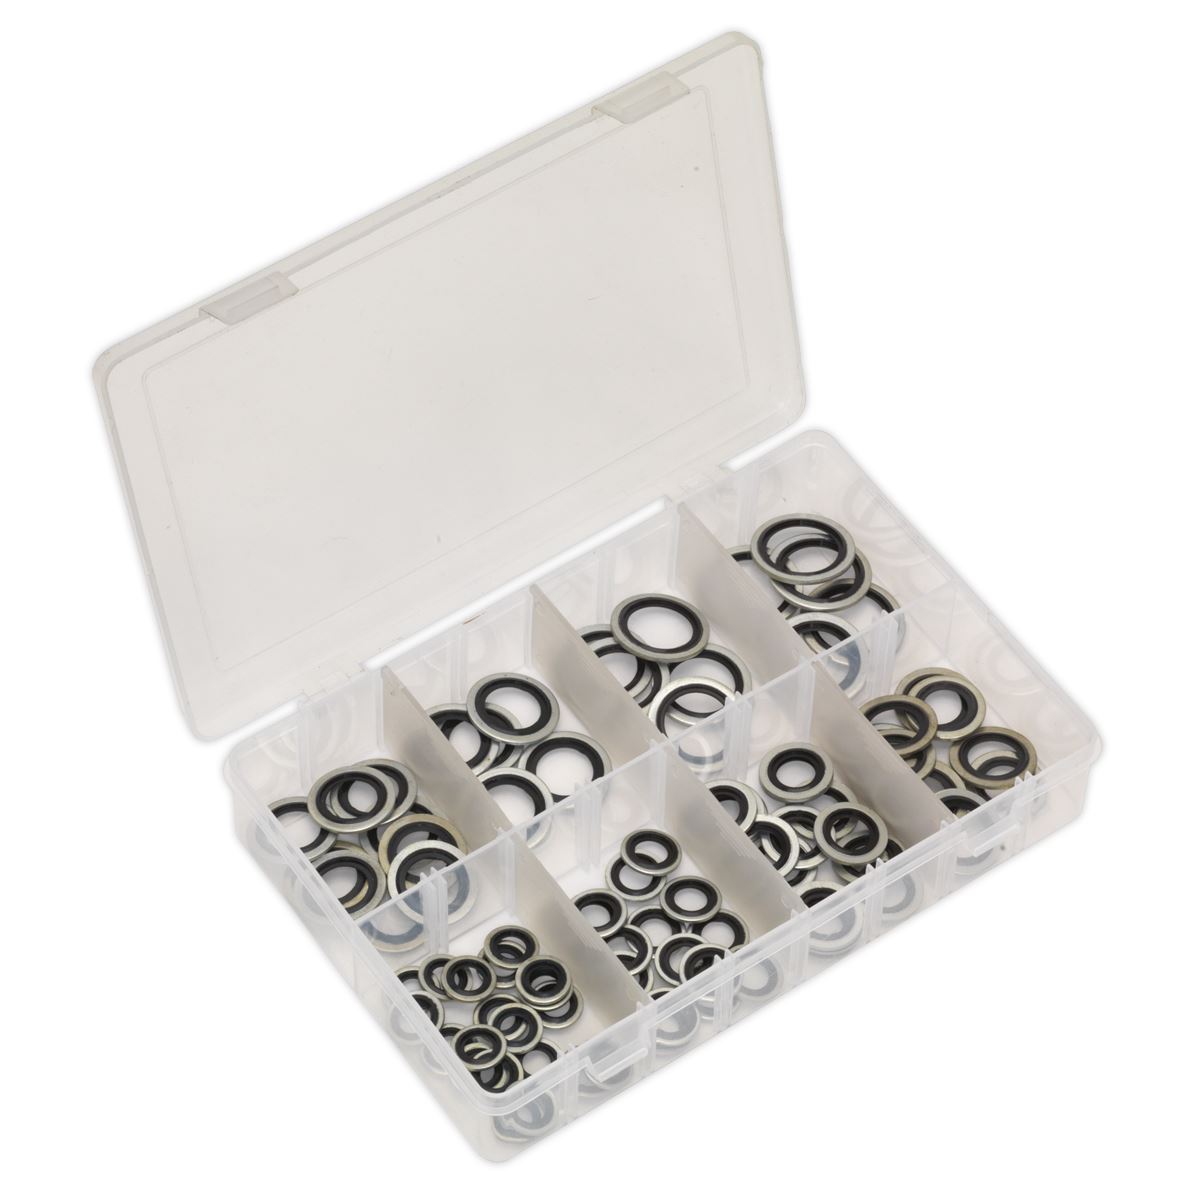 Sealey Bonded Seal (Dowty Seal) Assortment 88pc - Metric